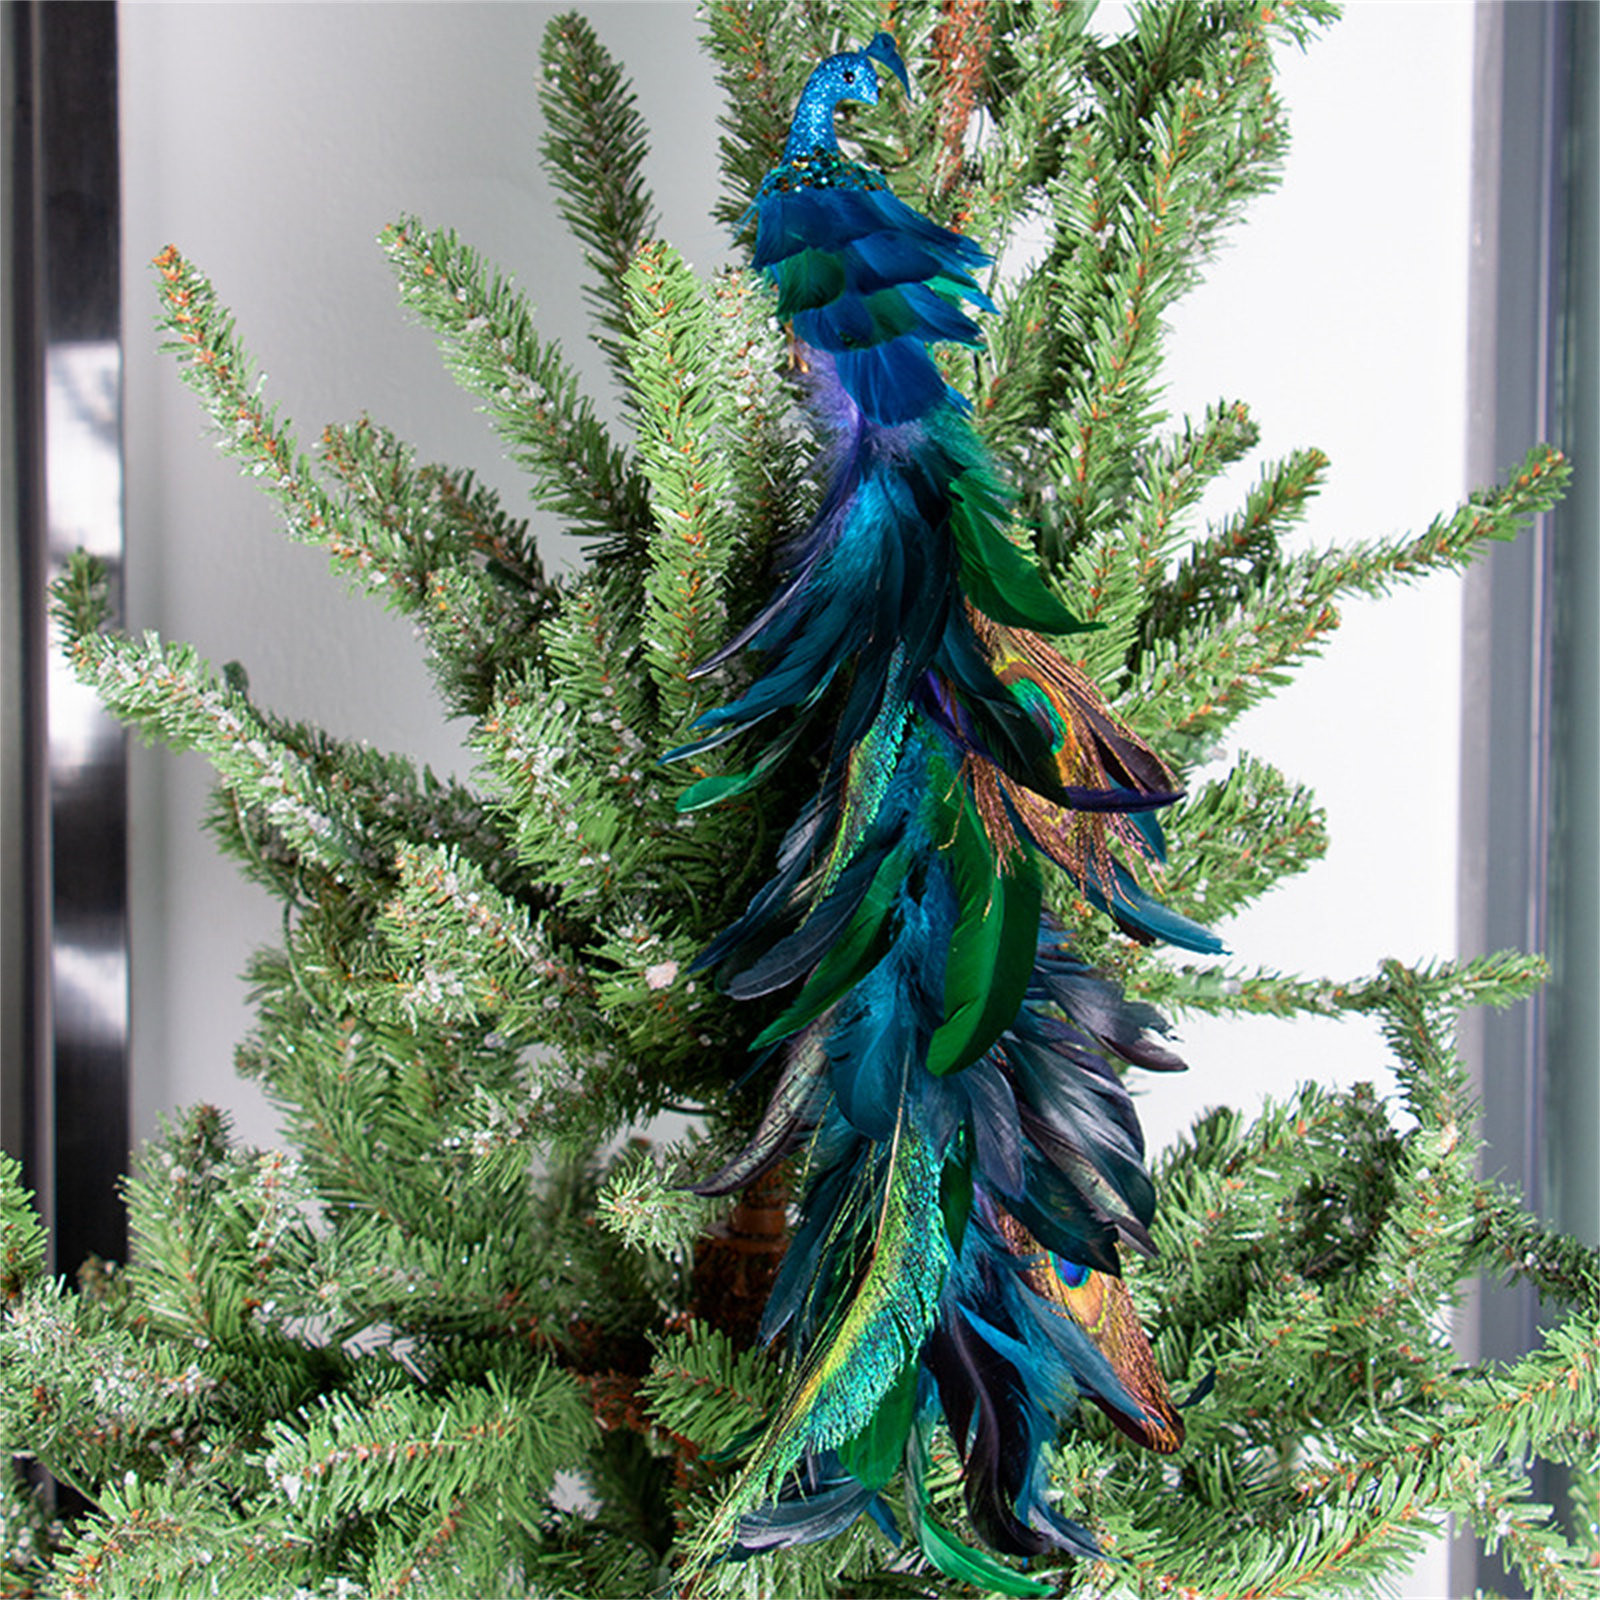 Wangxldd Christmas Decorations Faux Peacock Ornaments,Glitter Blue Peacock Ornaments with Tail Feather Clip-On Decor Set for Christmas Tree